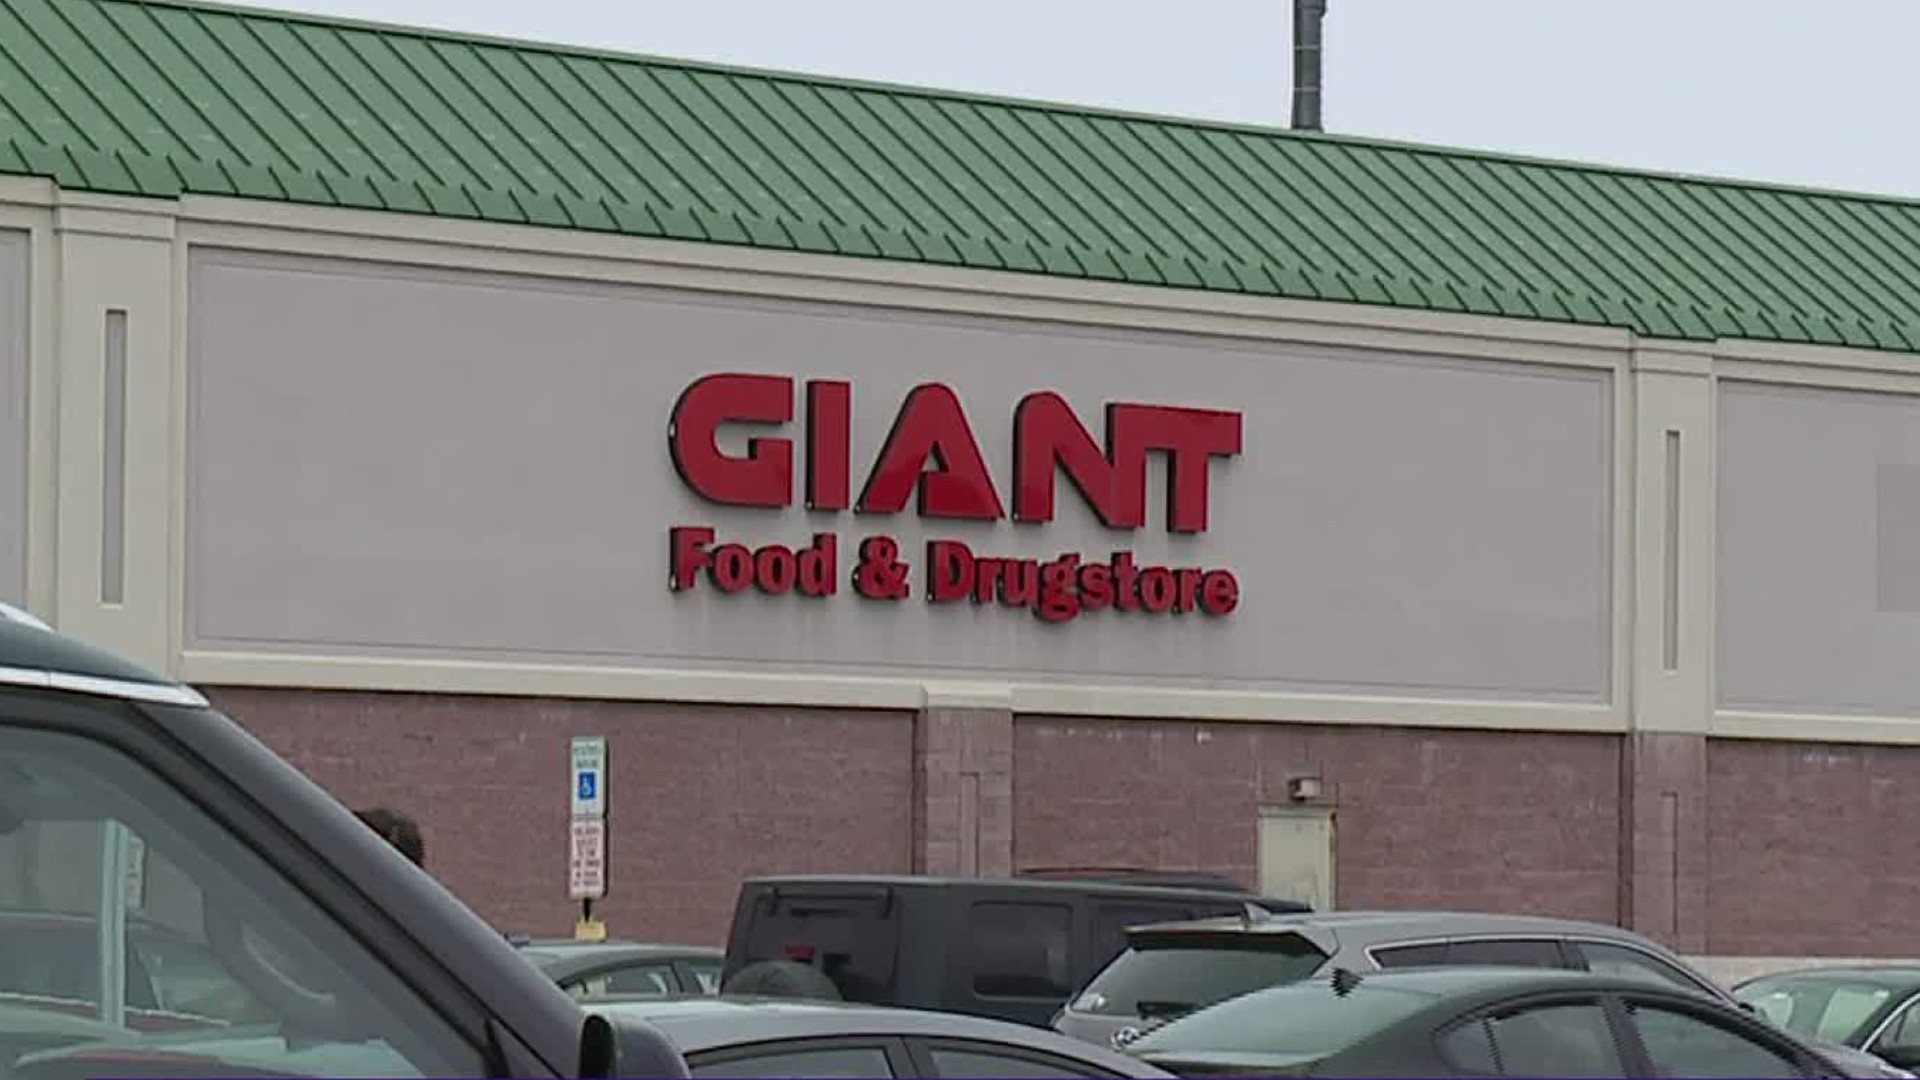 Giant announced that starting Saturday, its 24-hour stores will close at midnight and reopen at 6 a.m.